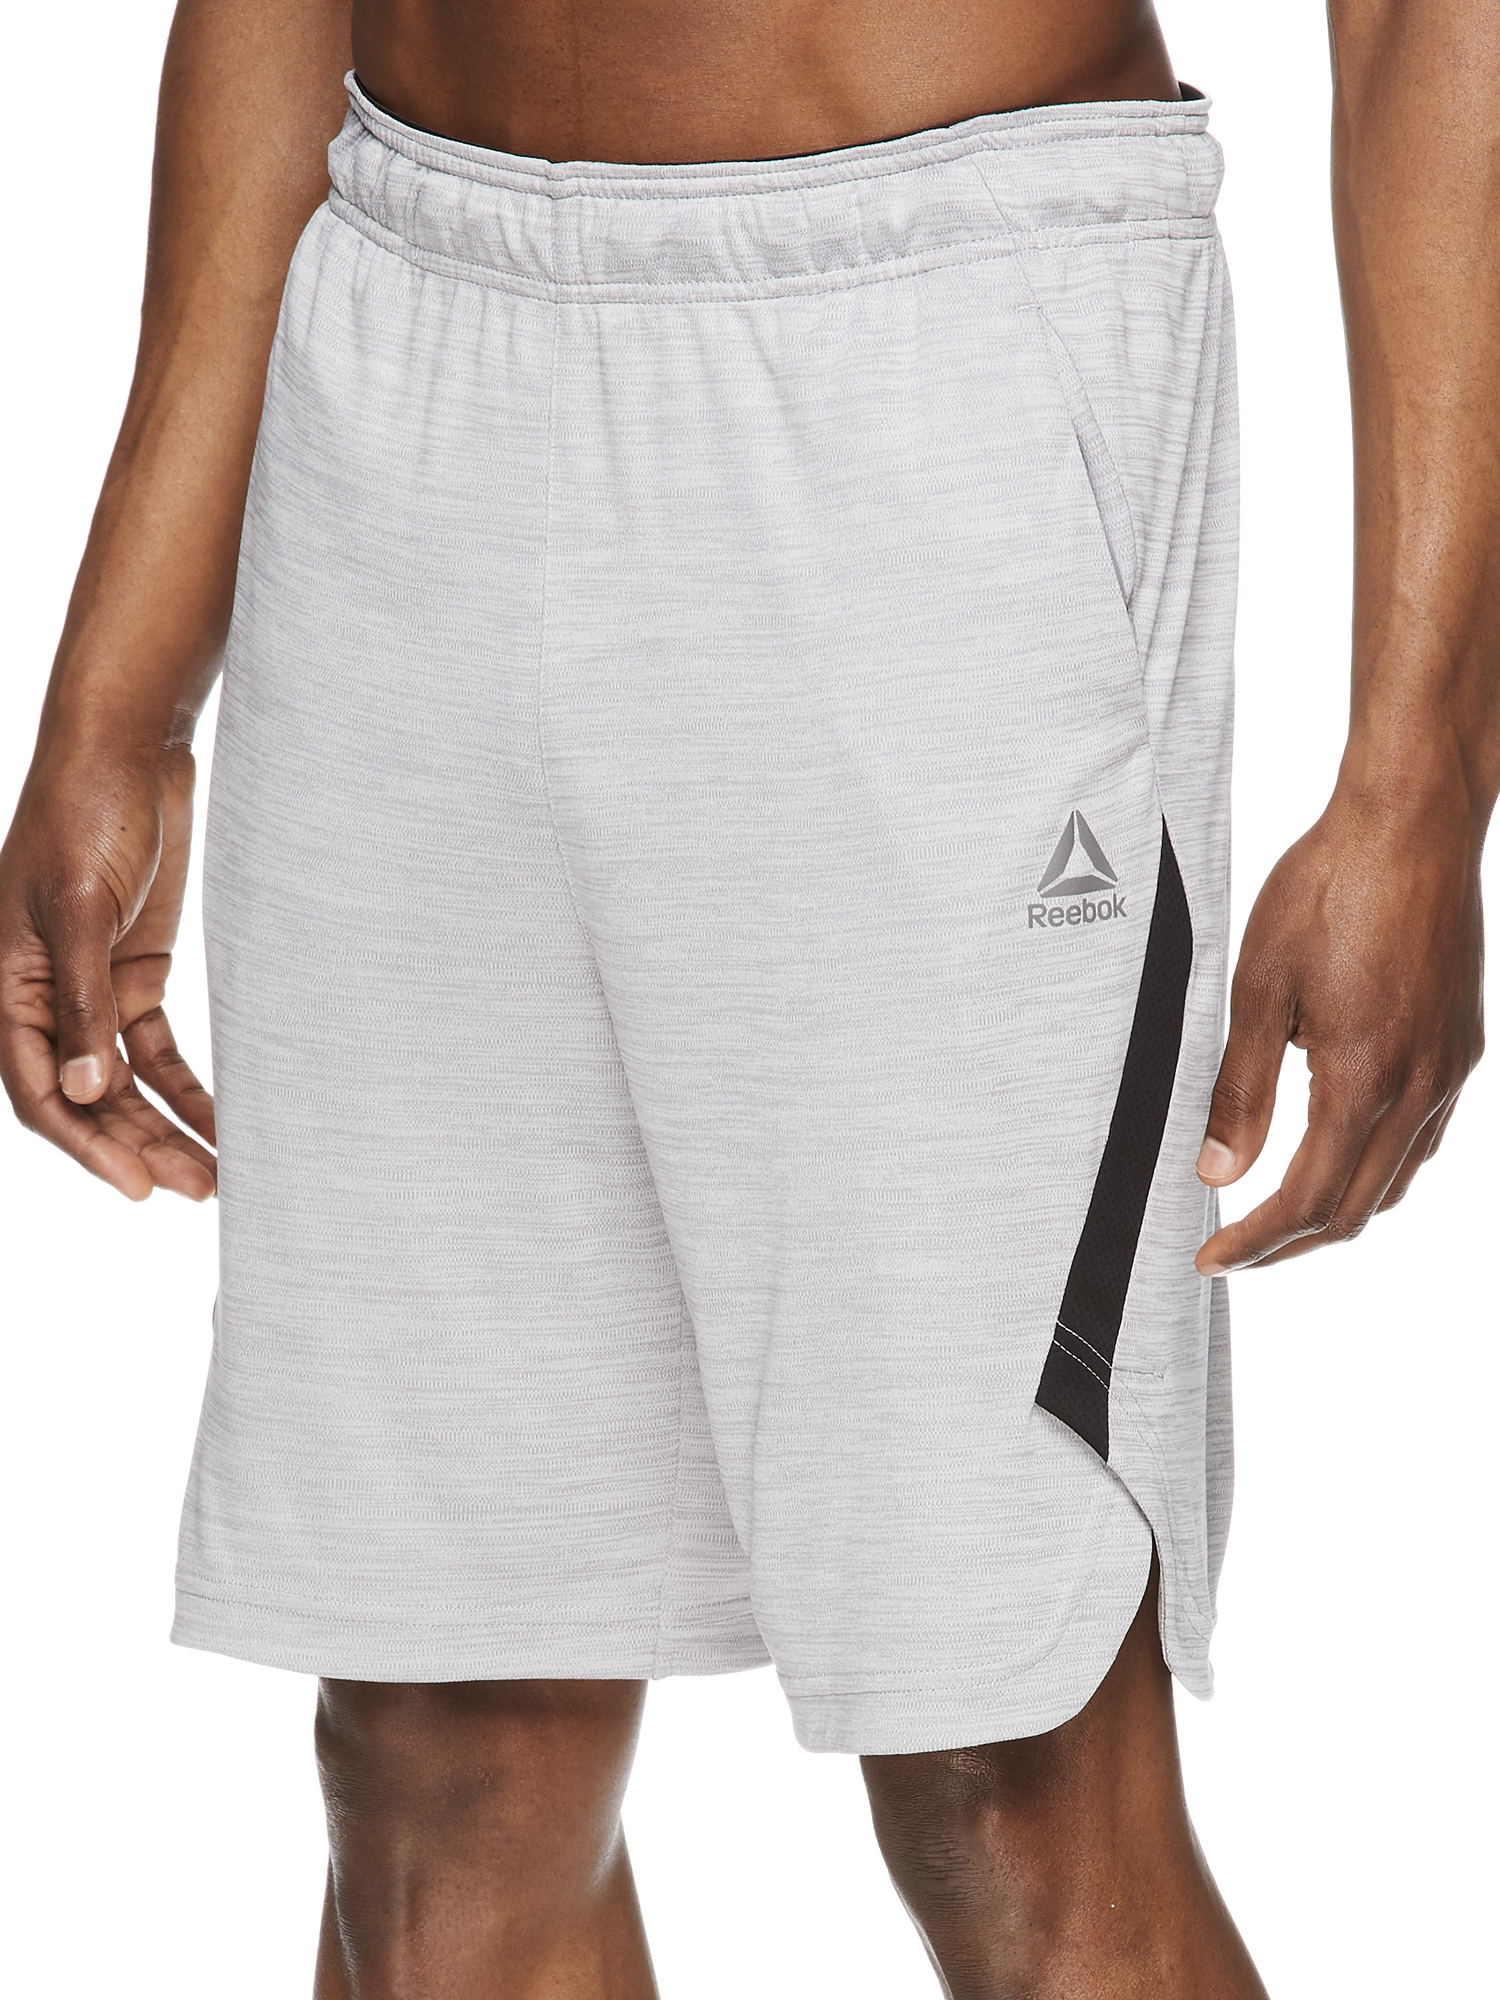 Reebok Men's and Big Men's 9" Free Weight Training Shorts, up to 5XL - image 4 of 4